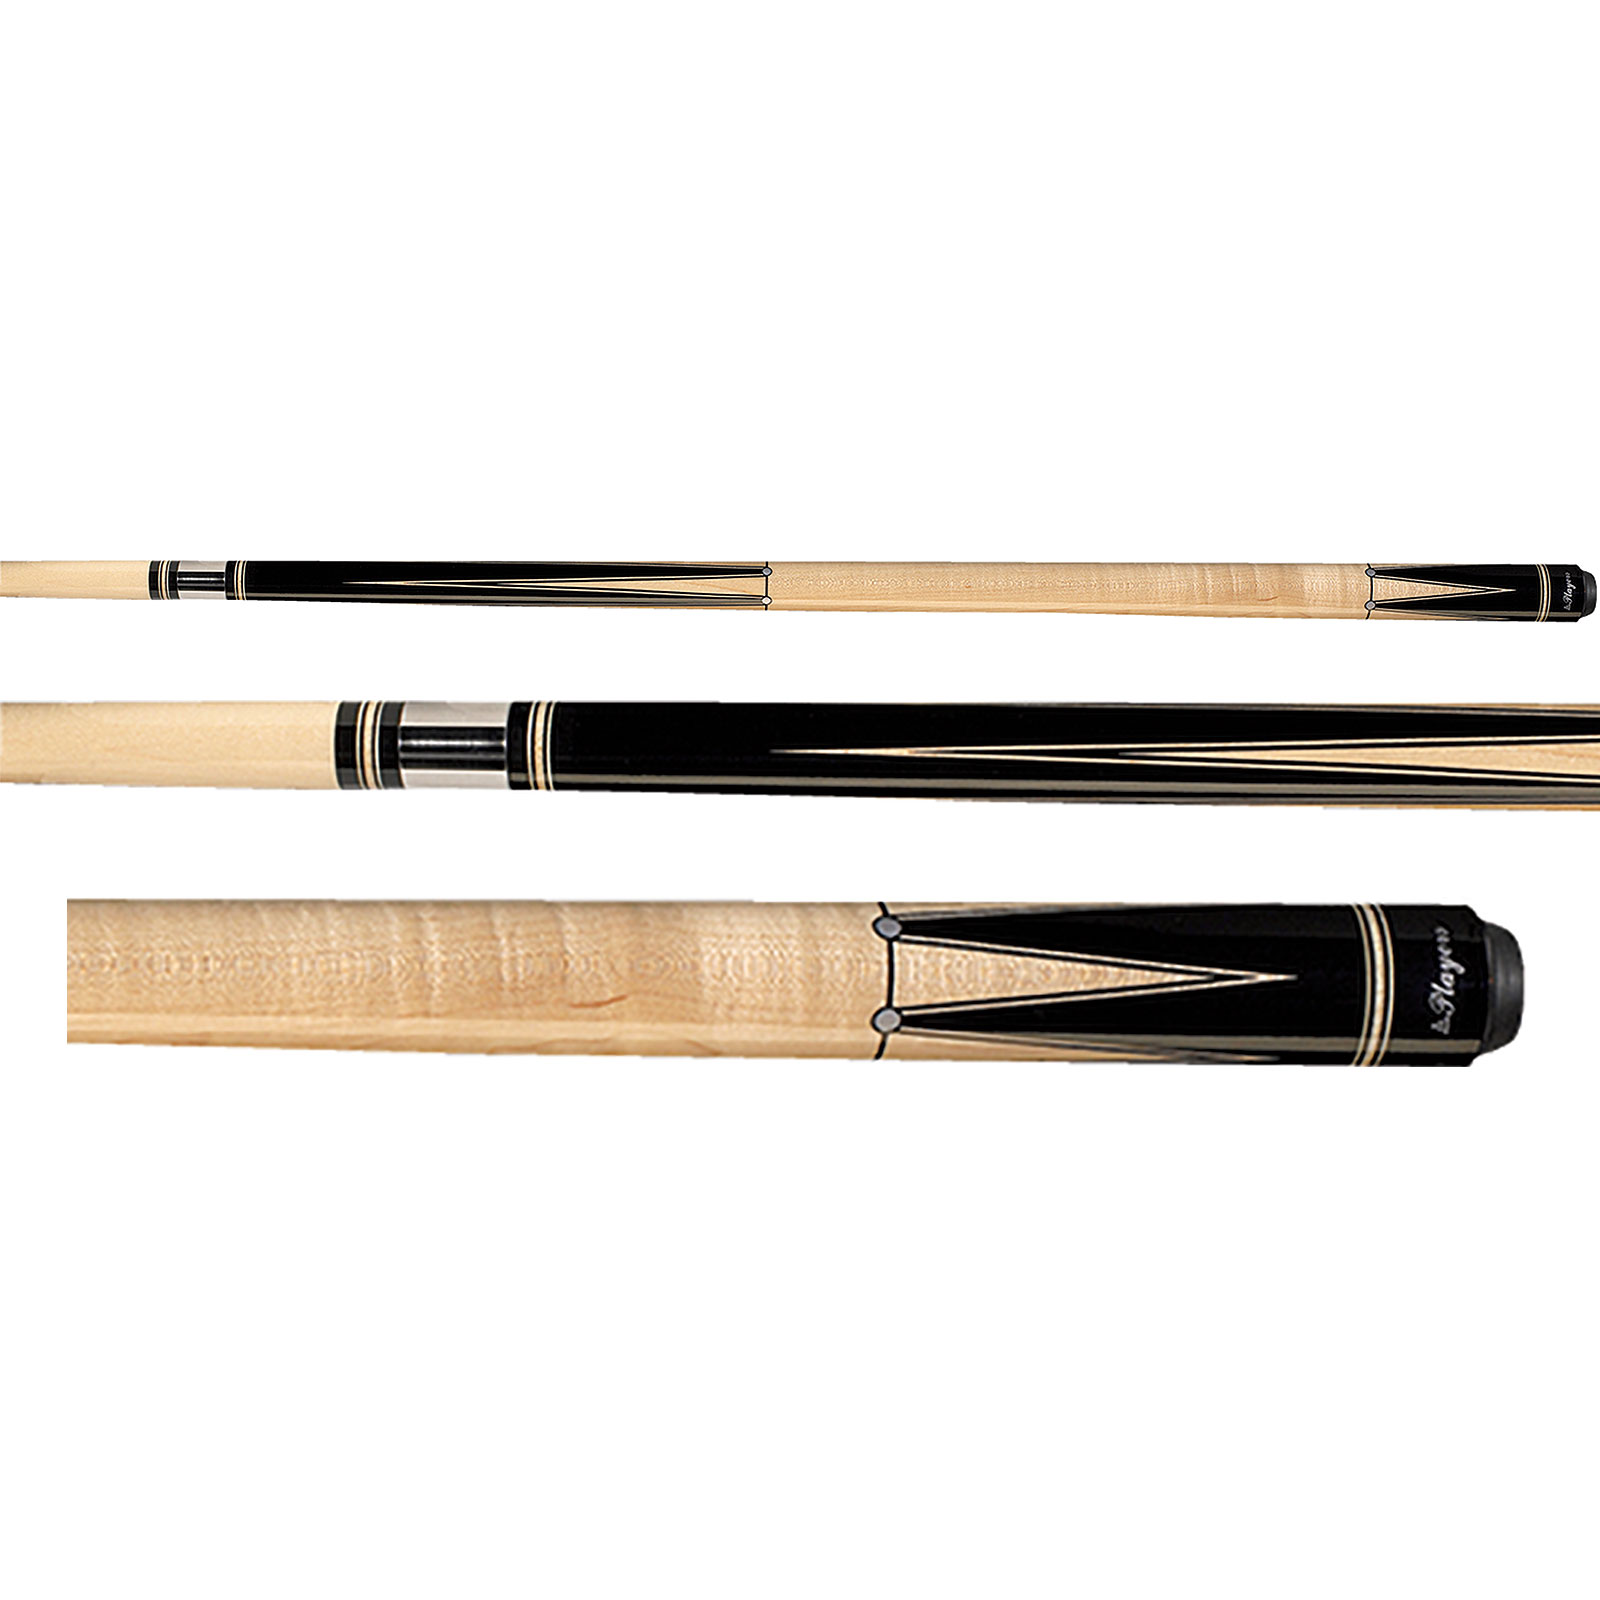 Players G-2232 Brown Pool Cue Stick